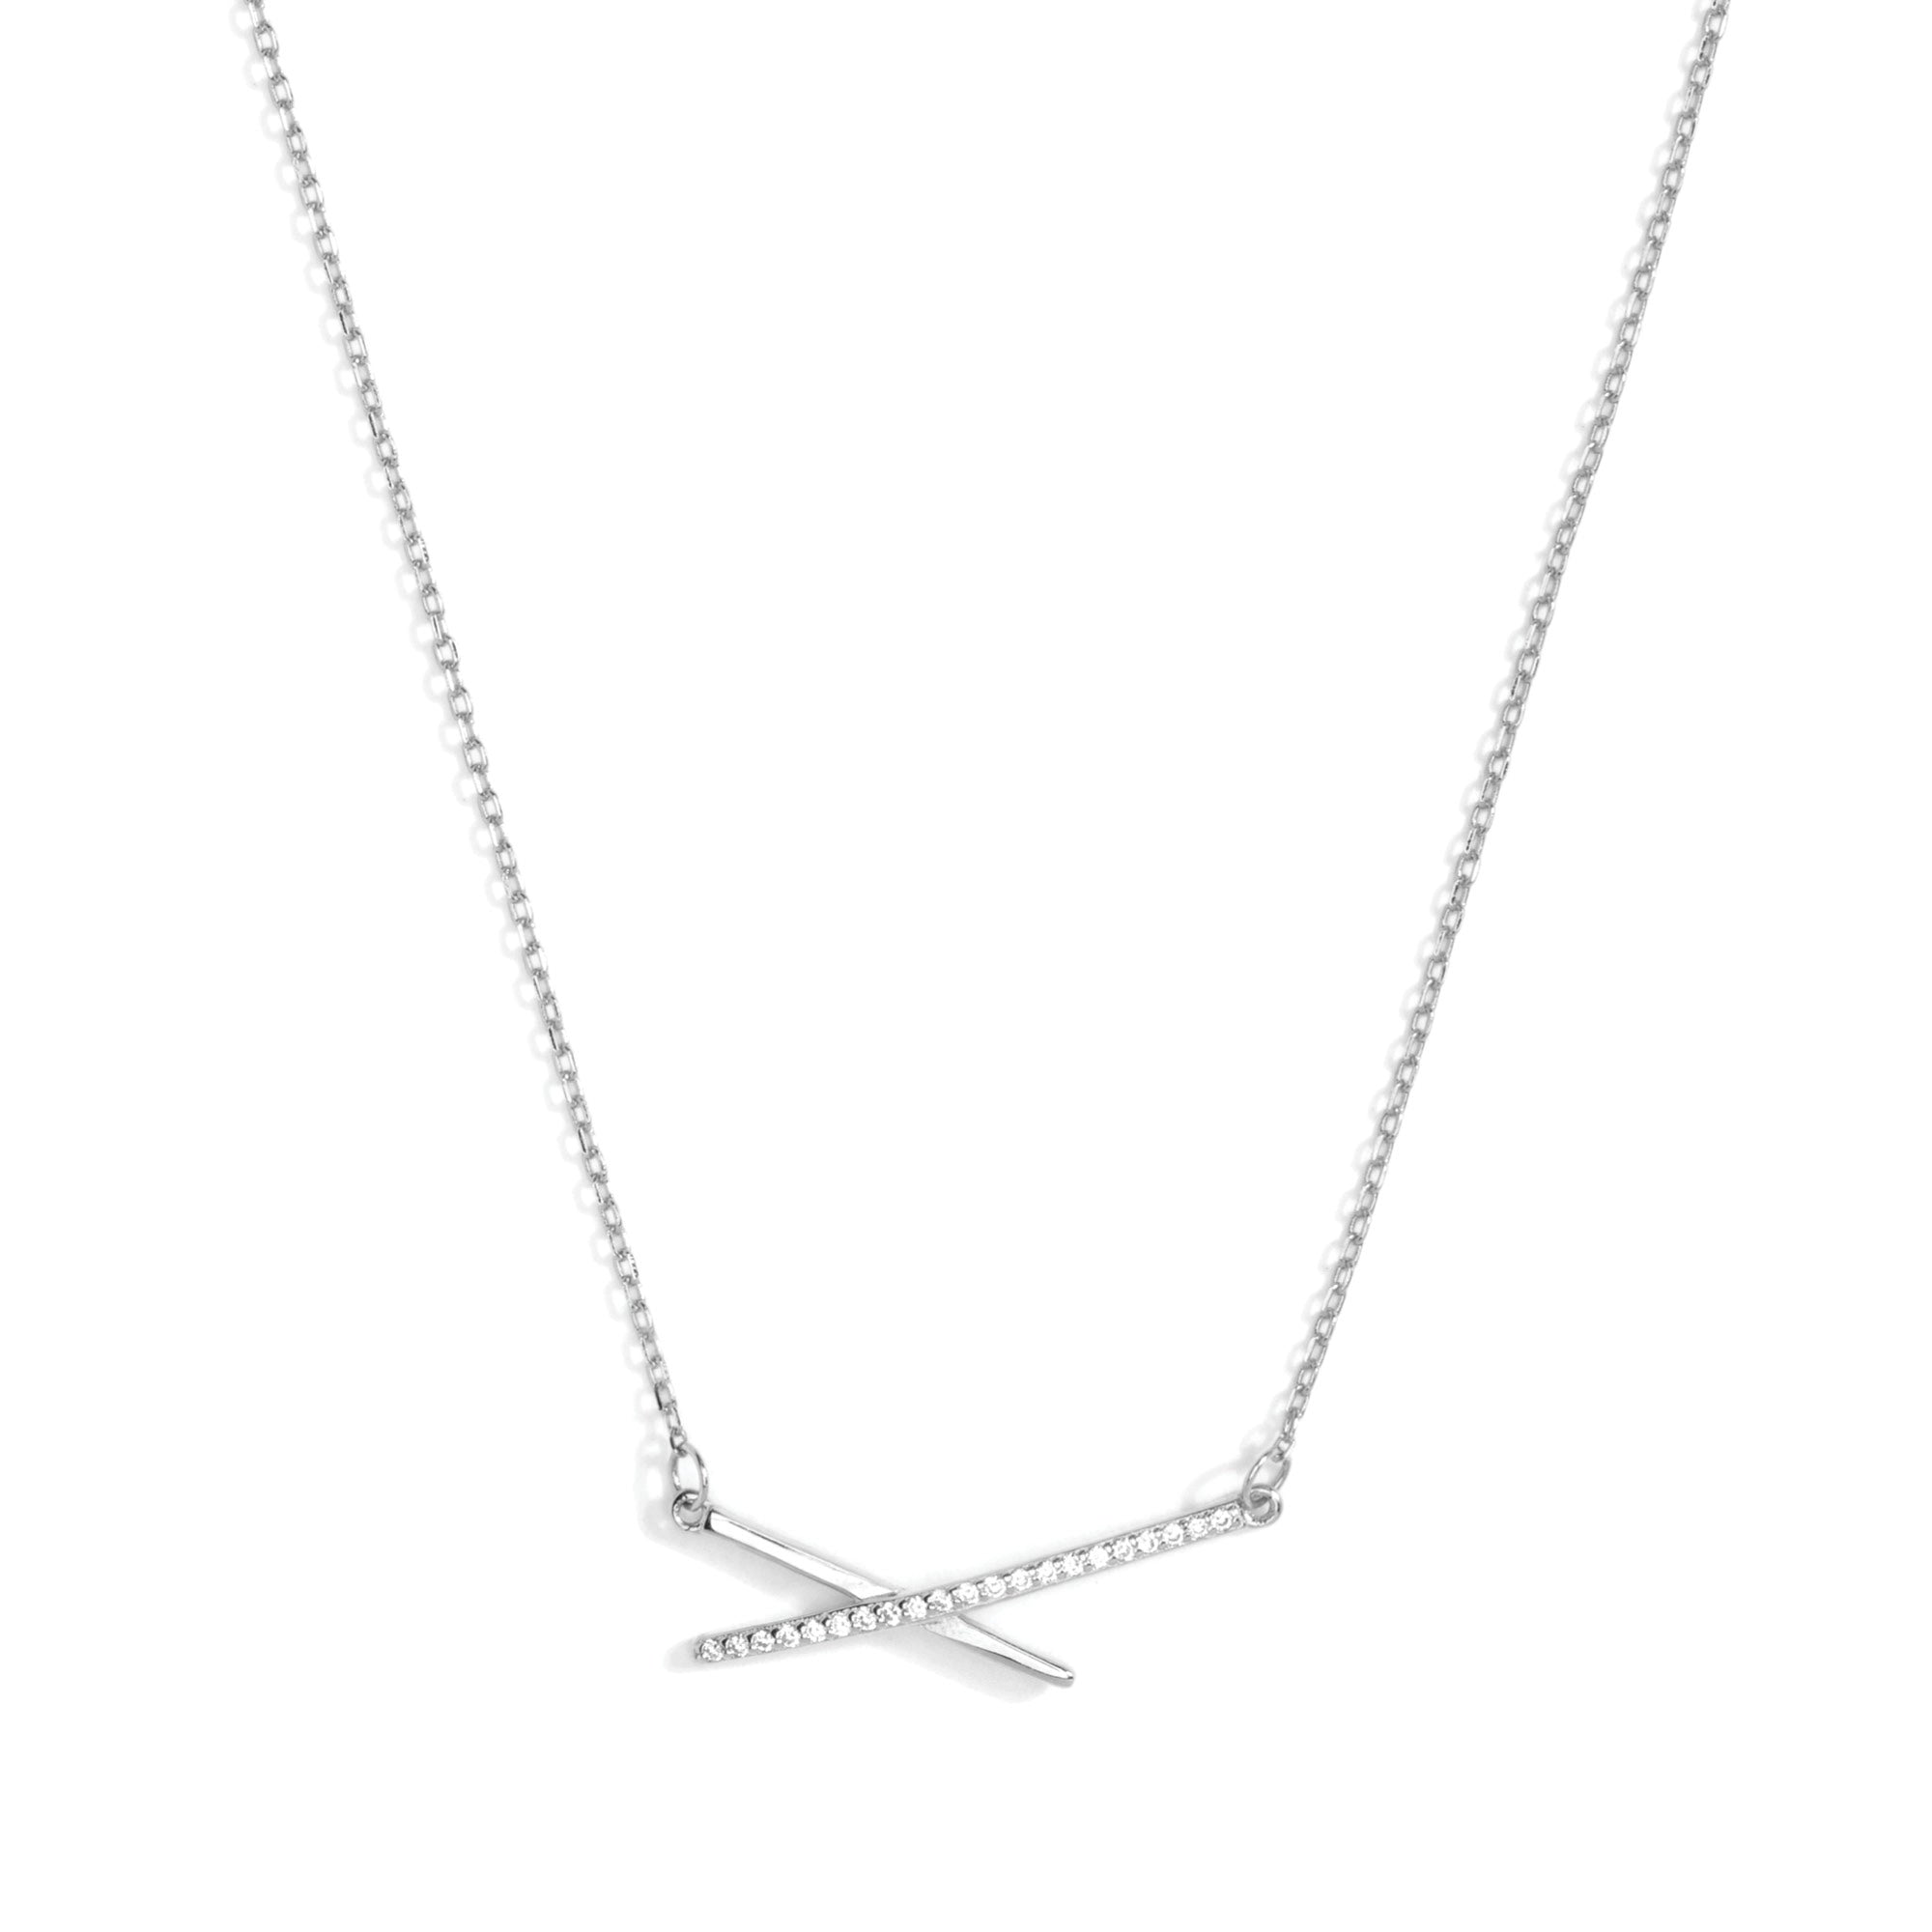 Delicate Pave Criss Cross Necklace